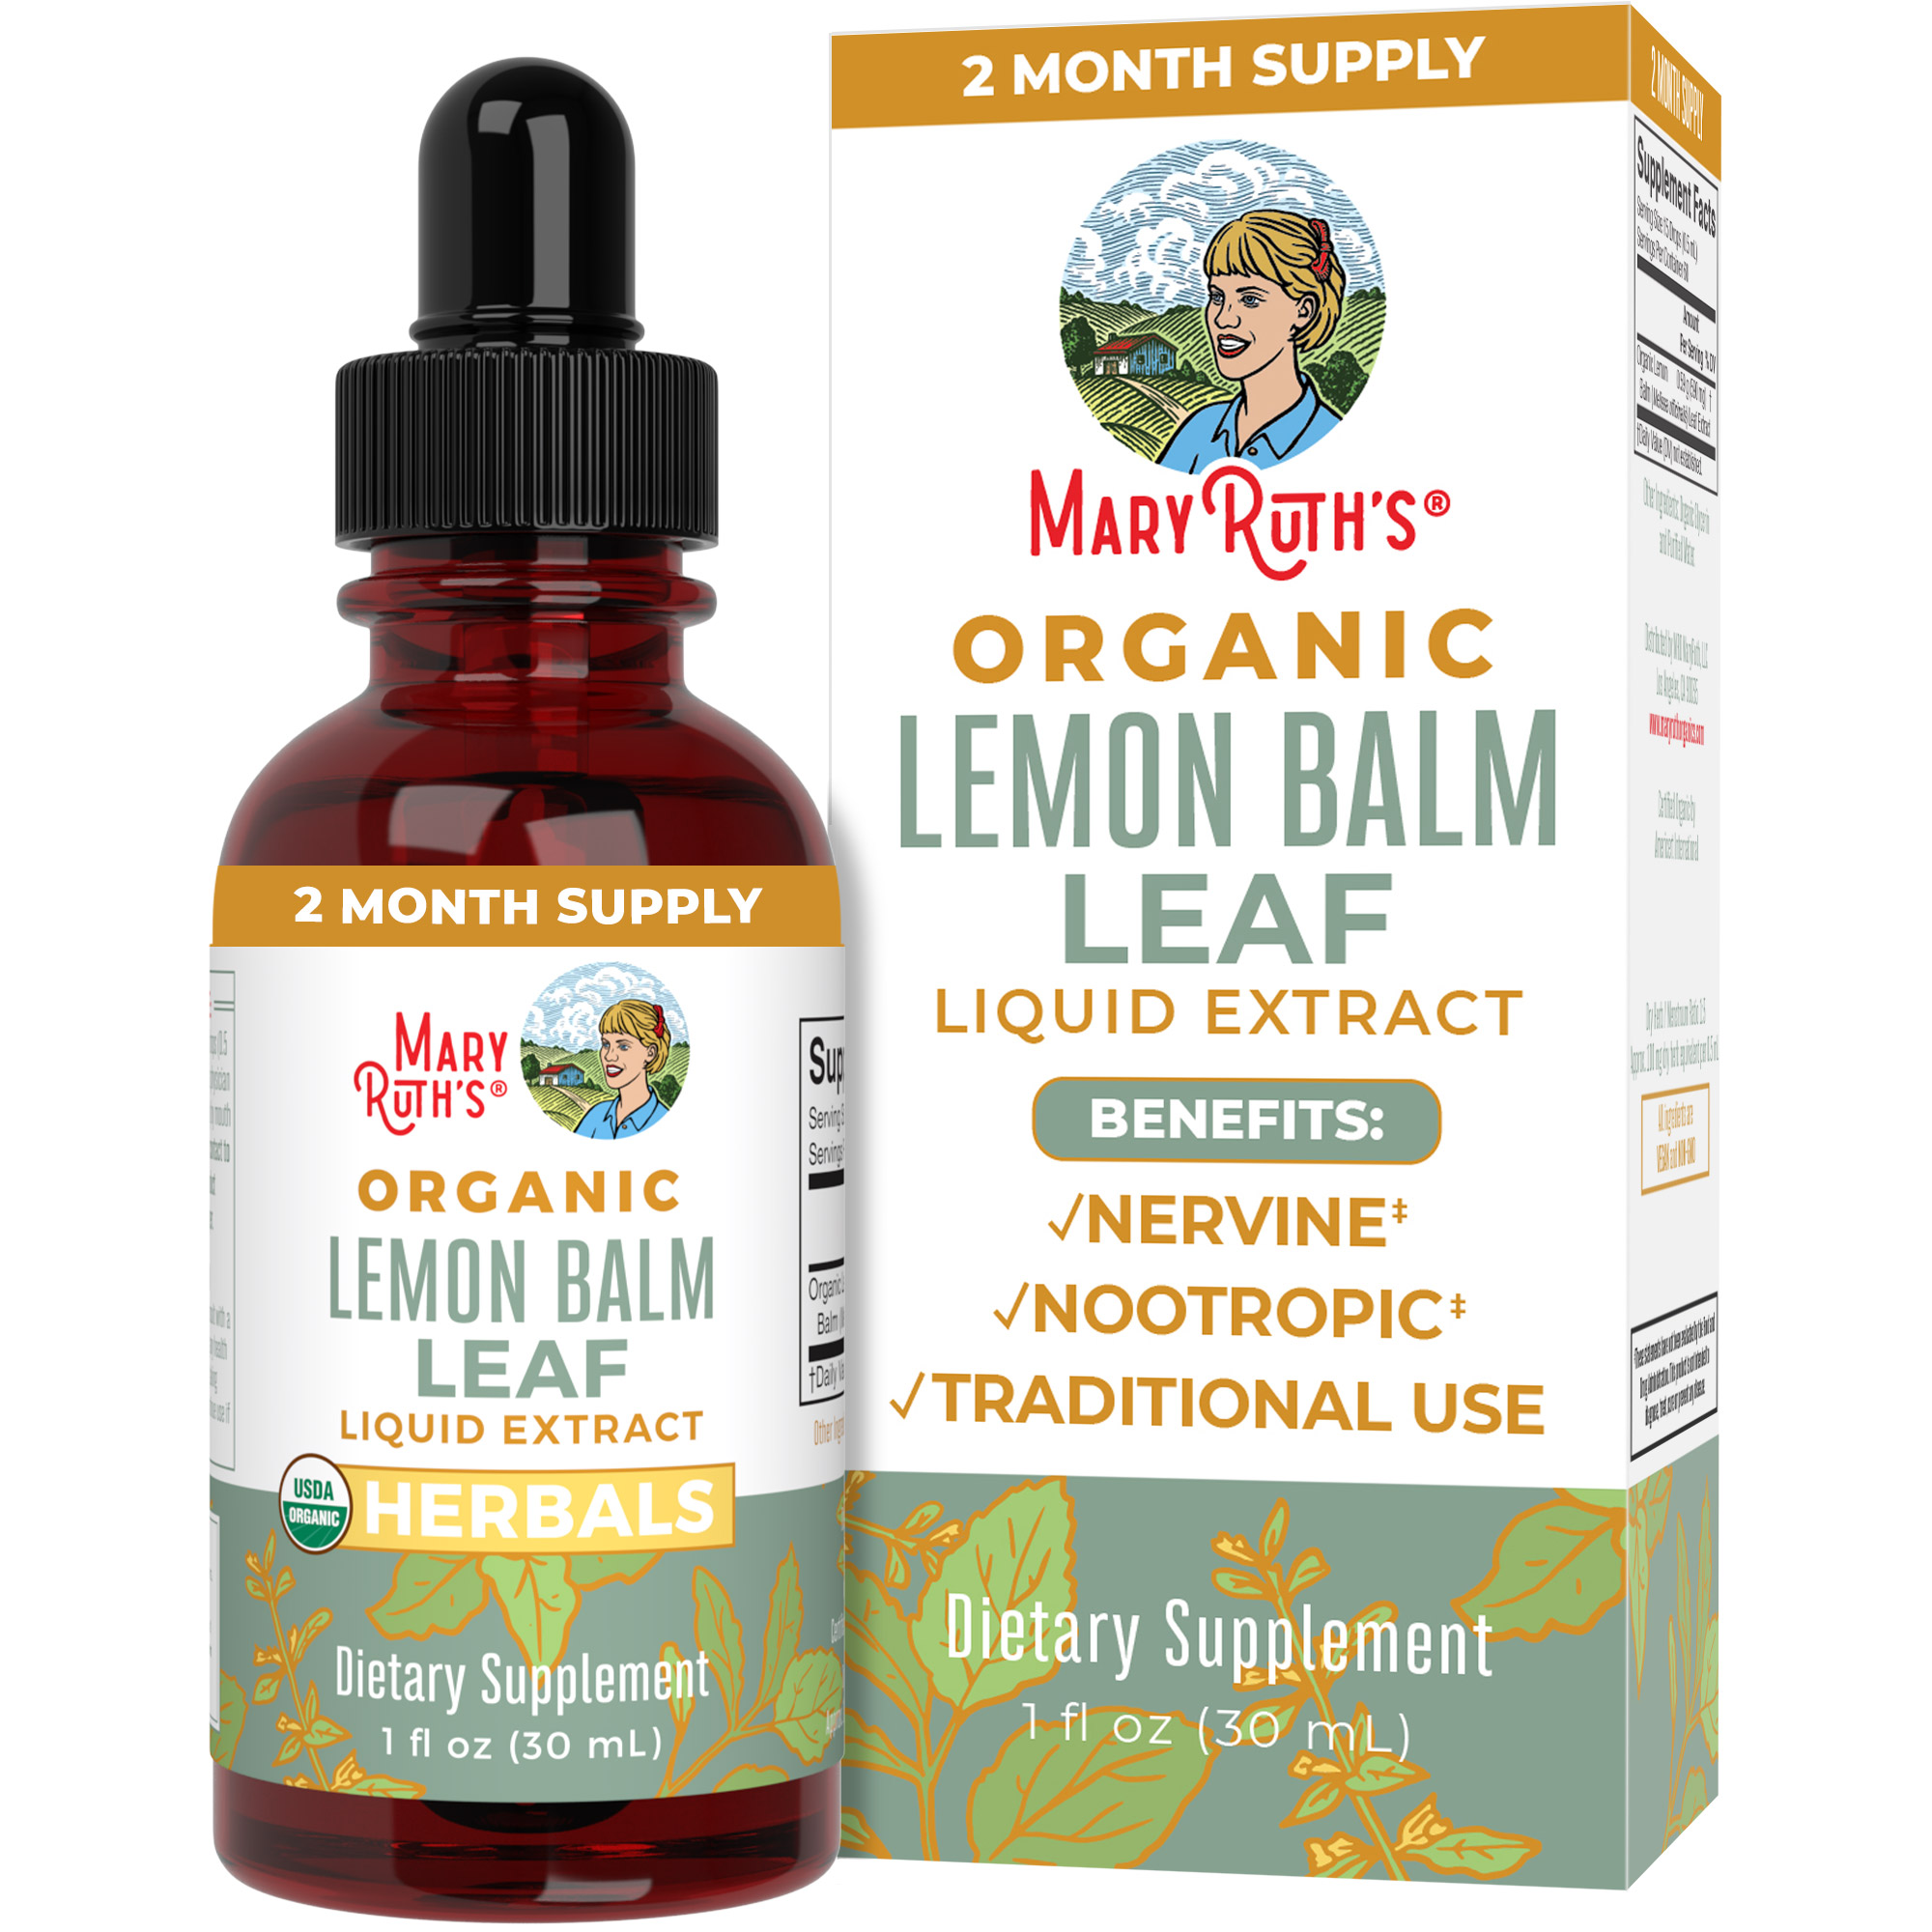 MaryRuth Organics | USDA Organic Lemon Balm Drops | Herbal Supplement for Calming & Cognitive Support | Vegan, Non-Gmo | 1 fl oz / 30ml | Clean Label Project Verified - image 1 of 8